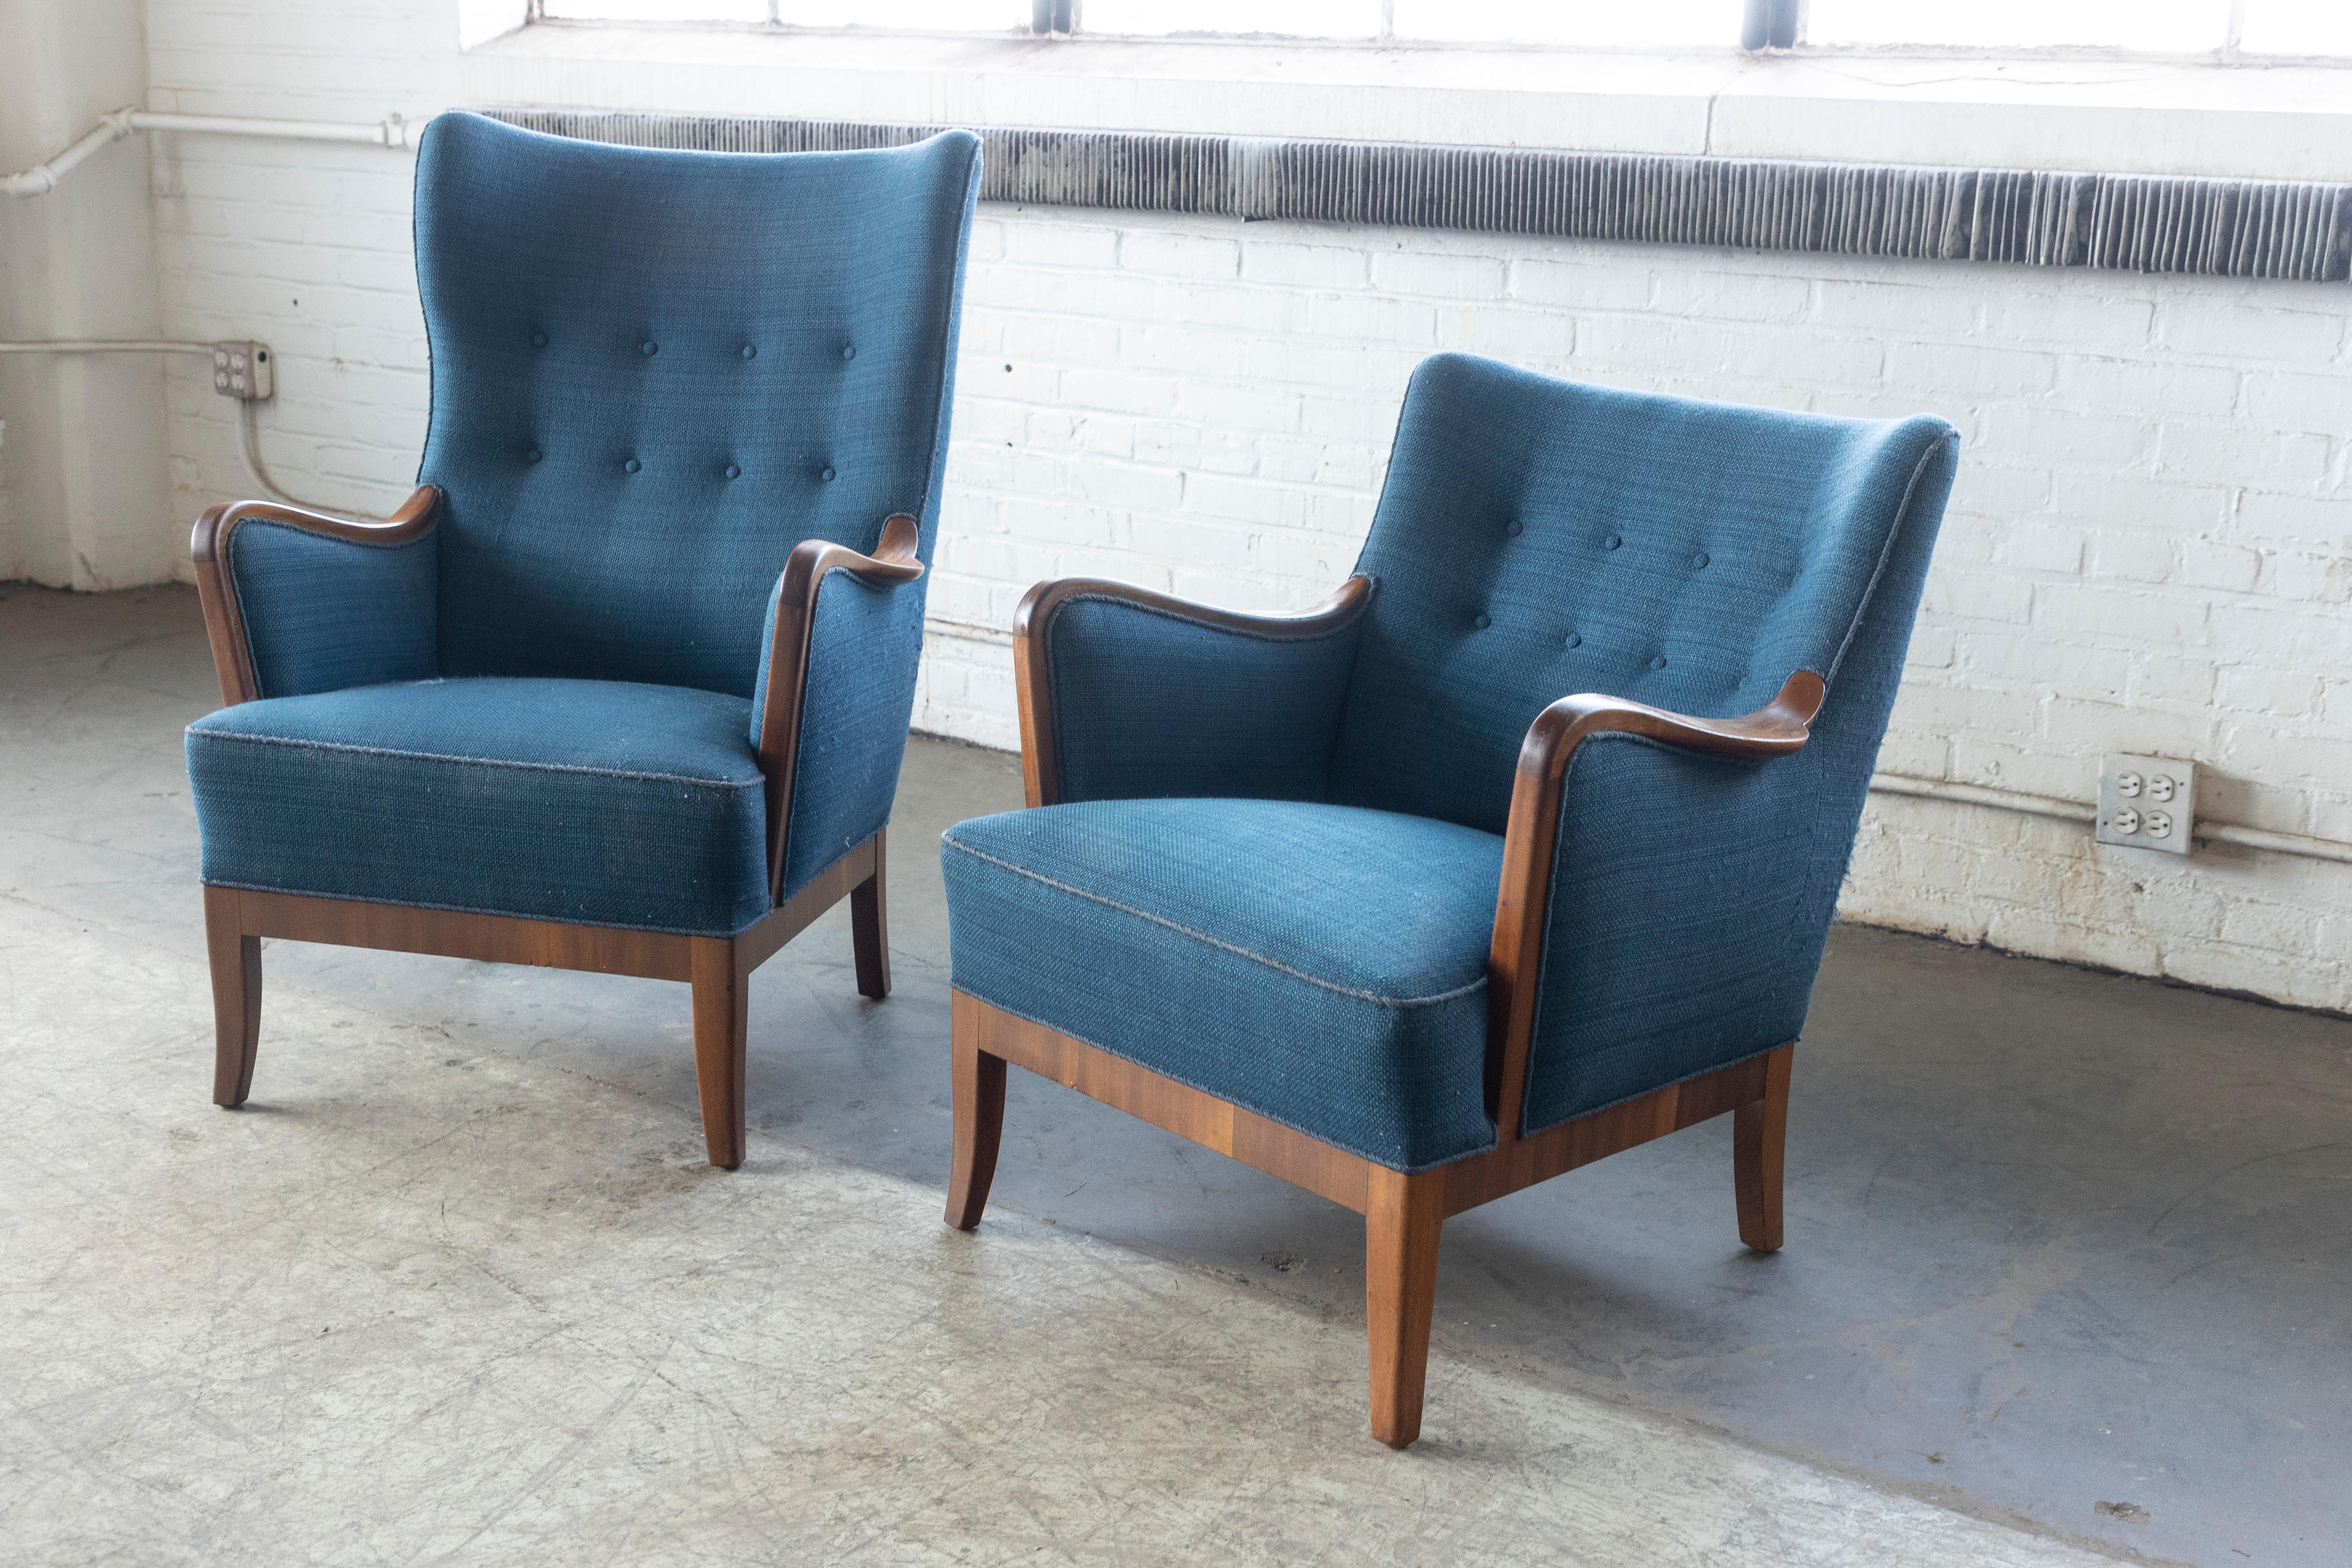 Very elegant and charming lounge chairs in his and hers style with walnut wood accents on the armrest and bottom frame and legs also in walnut. Very high quality craftmanship and finish. We are not familiar with the designer and maker of these